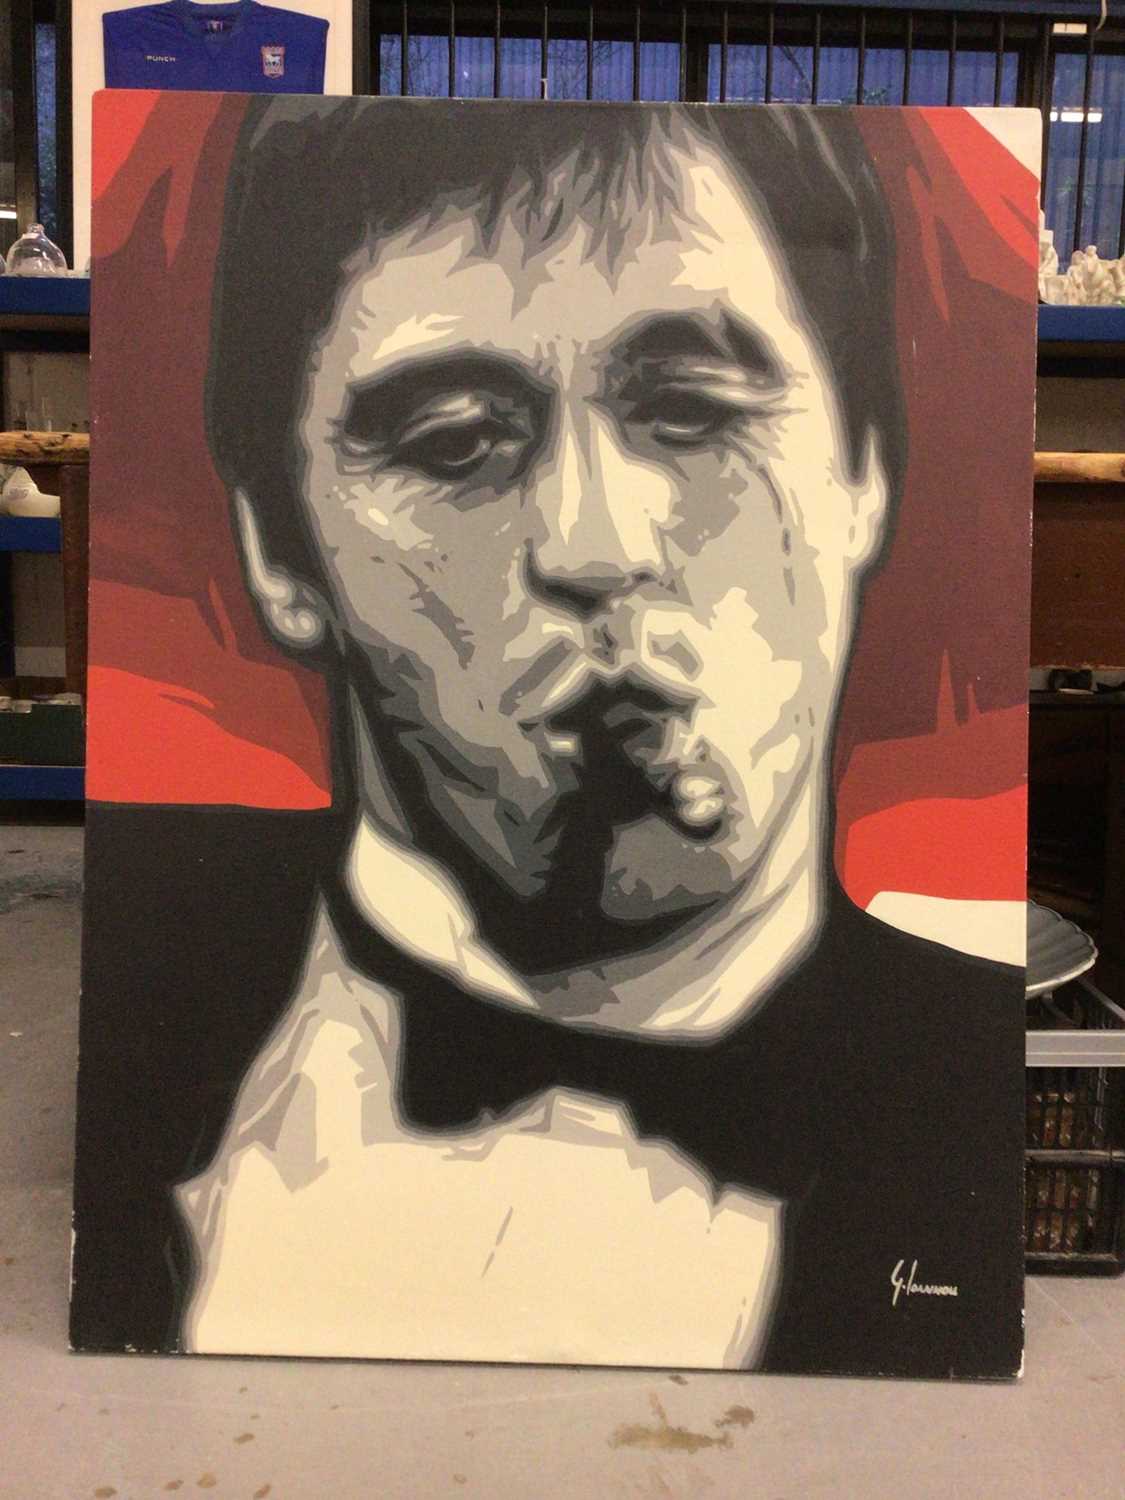 G. Ioannou signed limited edition Giclee print on canvas of Tony Montana of Scarface